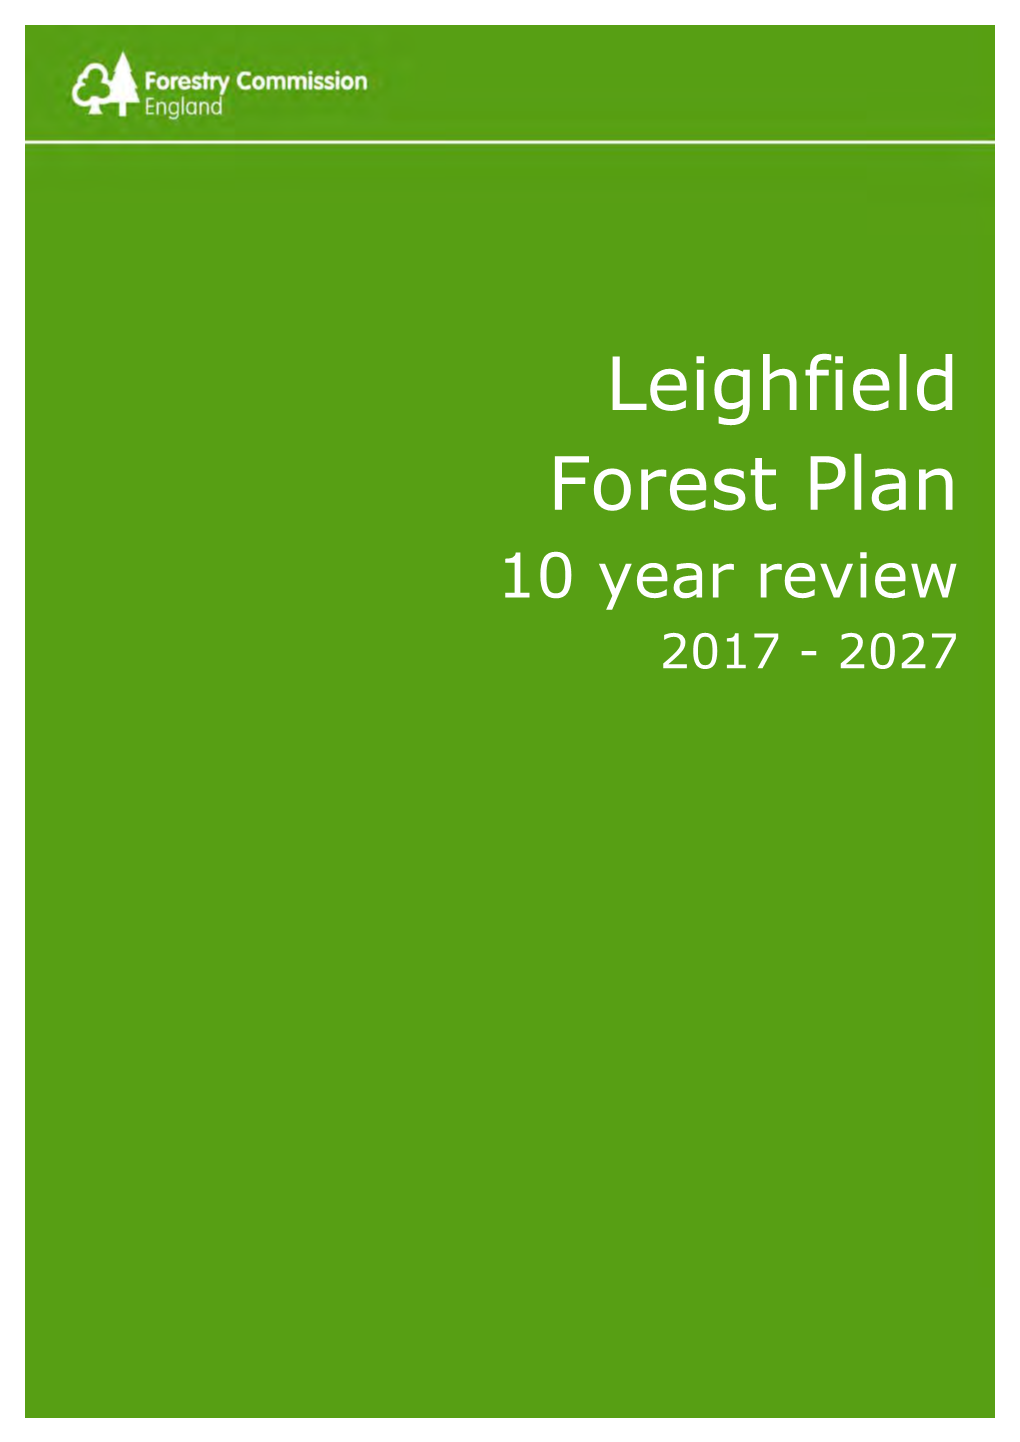 Leighfield Forest Plan 10 Year Review 2017 - 2027